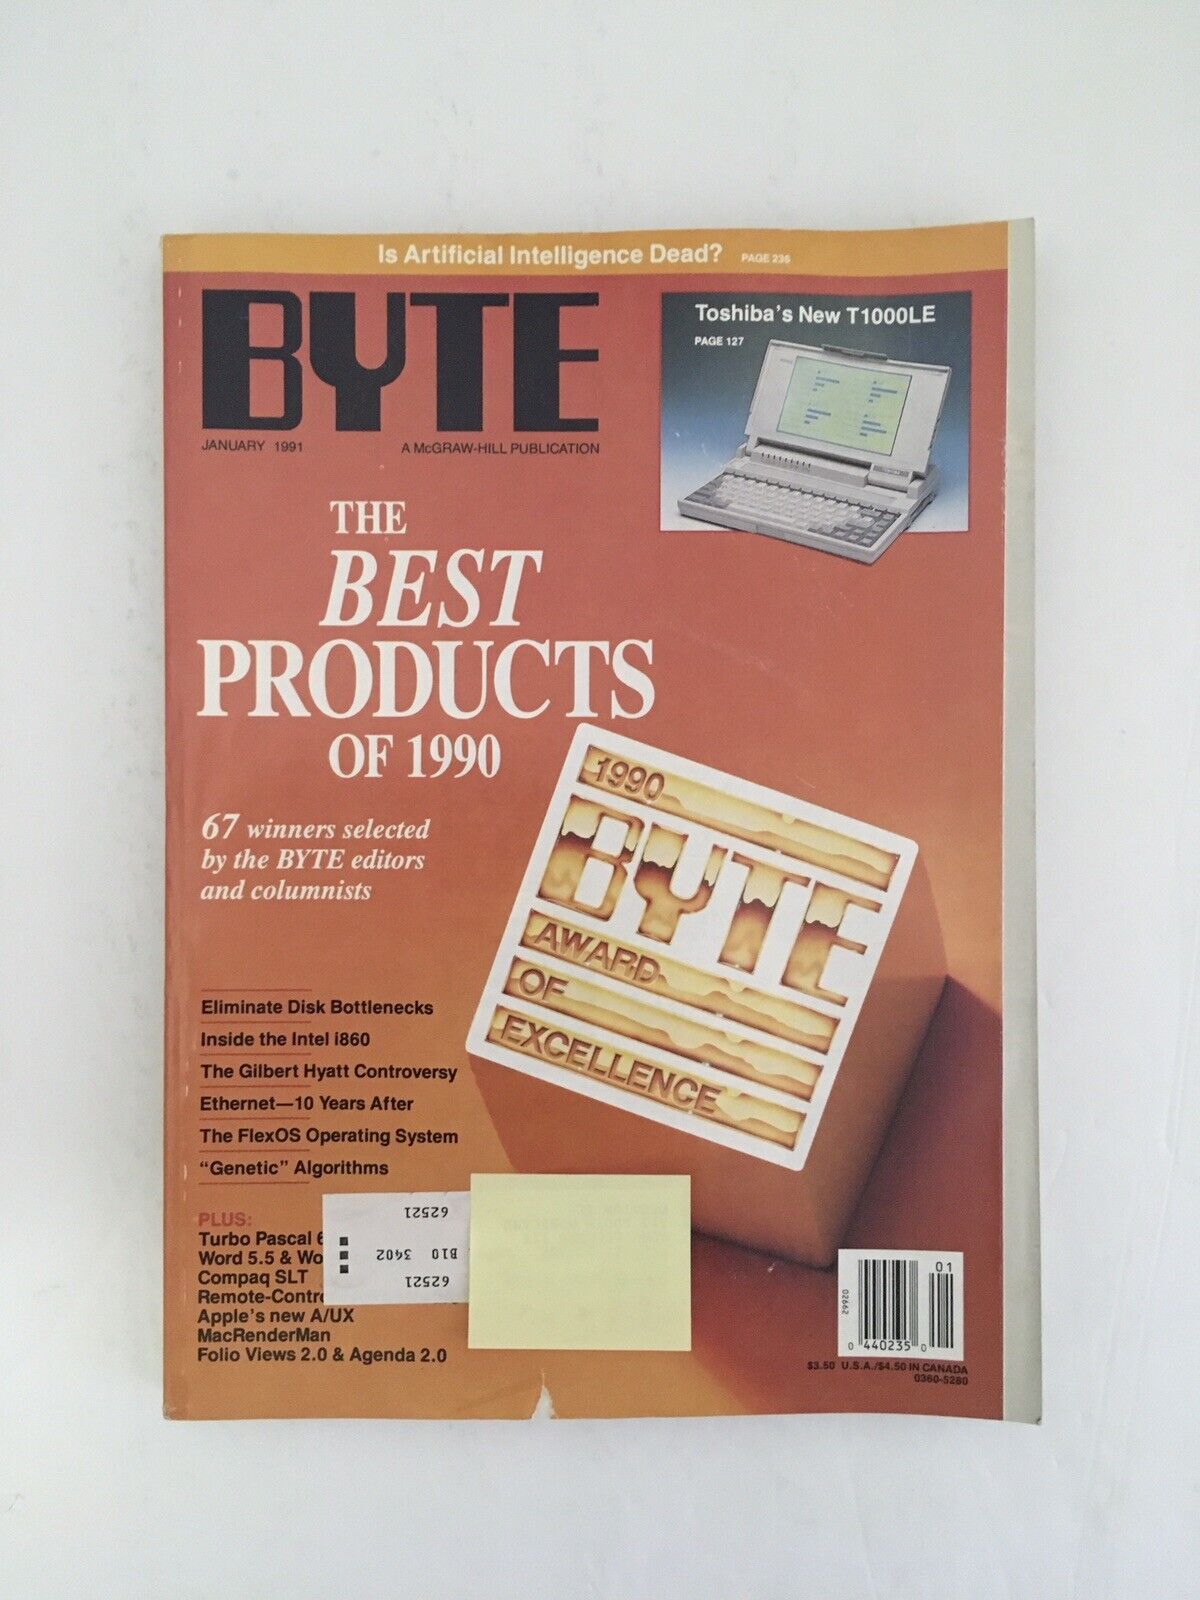 BYTE Magazine JAN 1991 Back Issue COMPUTER Magazine - The Best Products of 1990